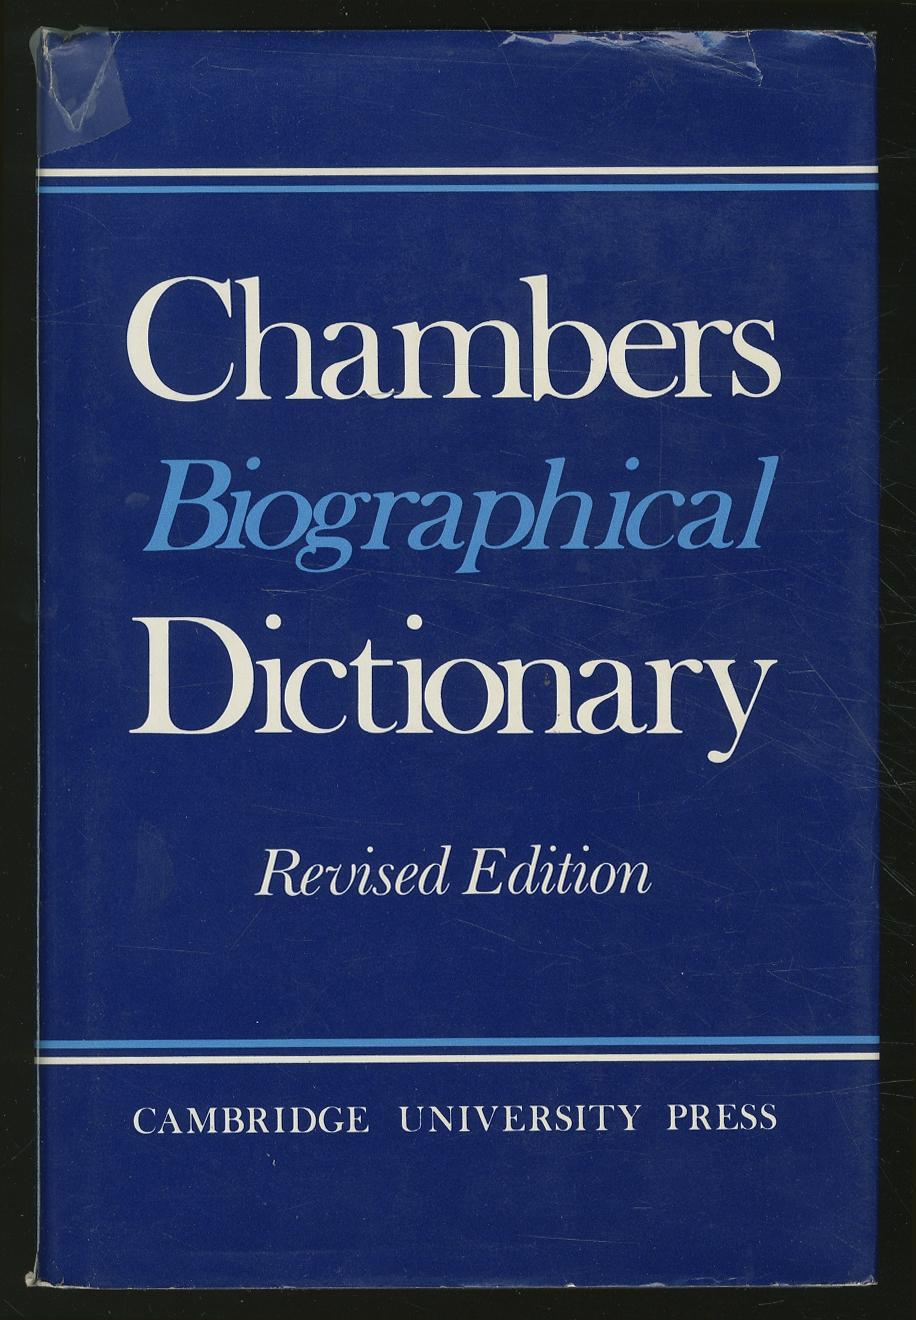 Chambers Biographical Dictionary - THORNE, J.O. and T.C. Collocott